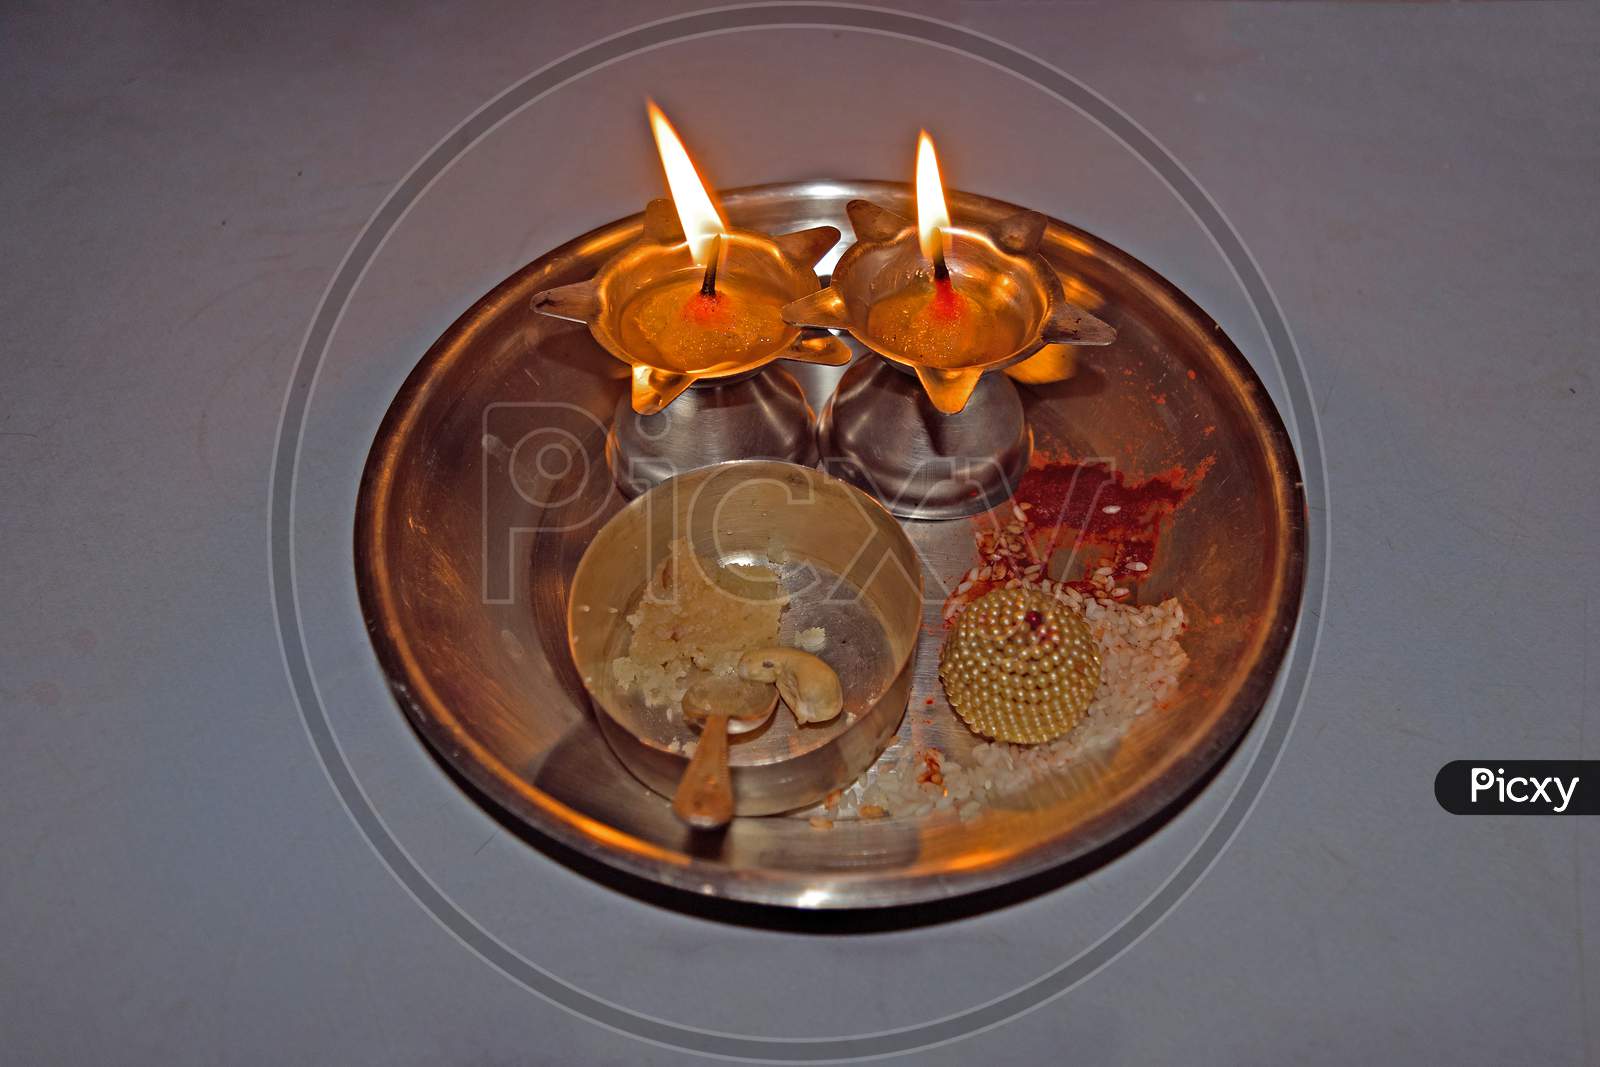 Isolated image of Indian Puja thali with two lit lamps.